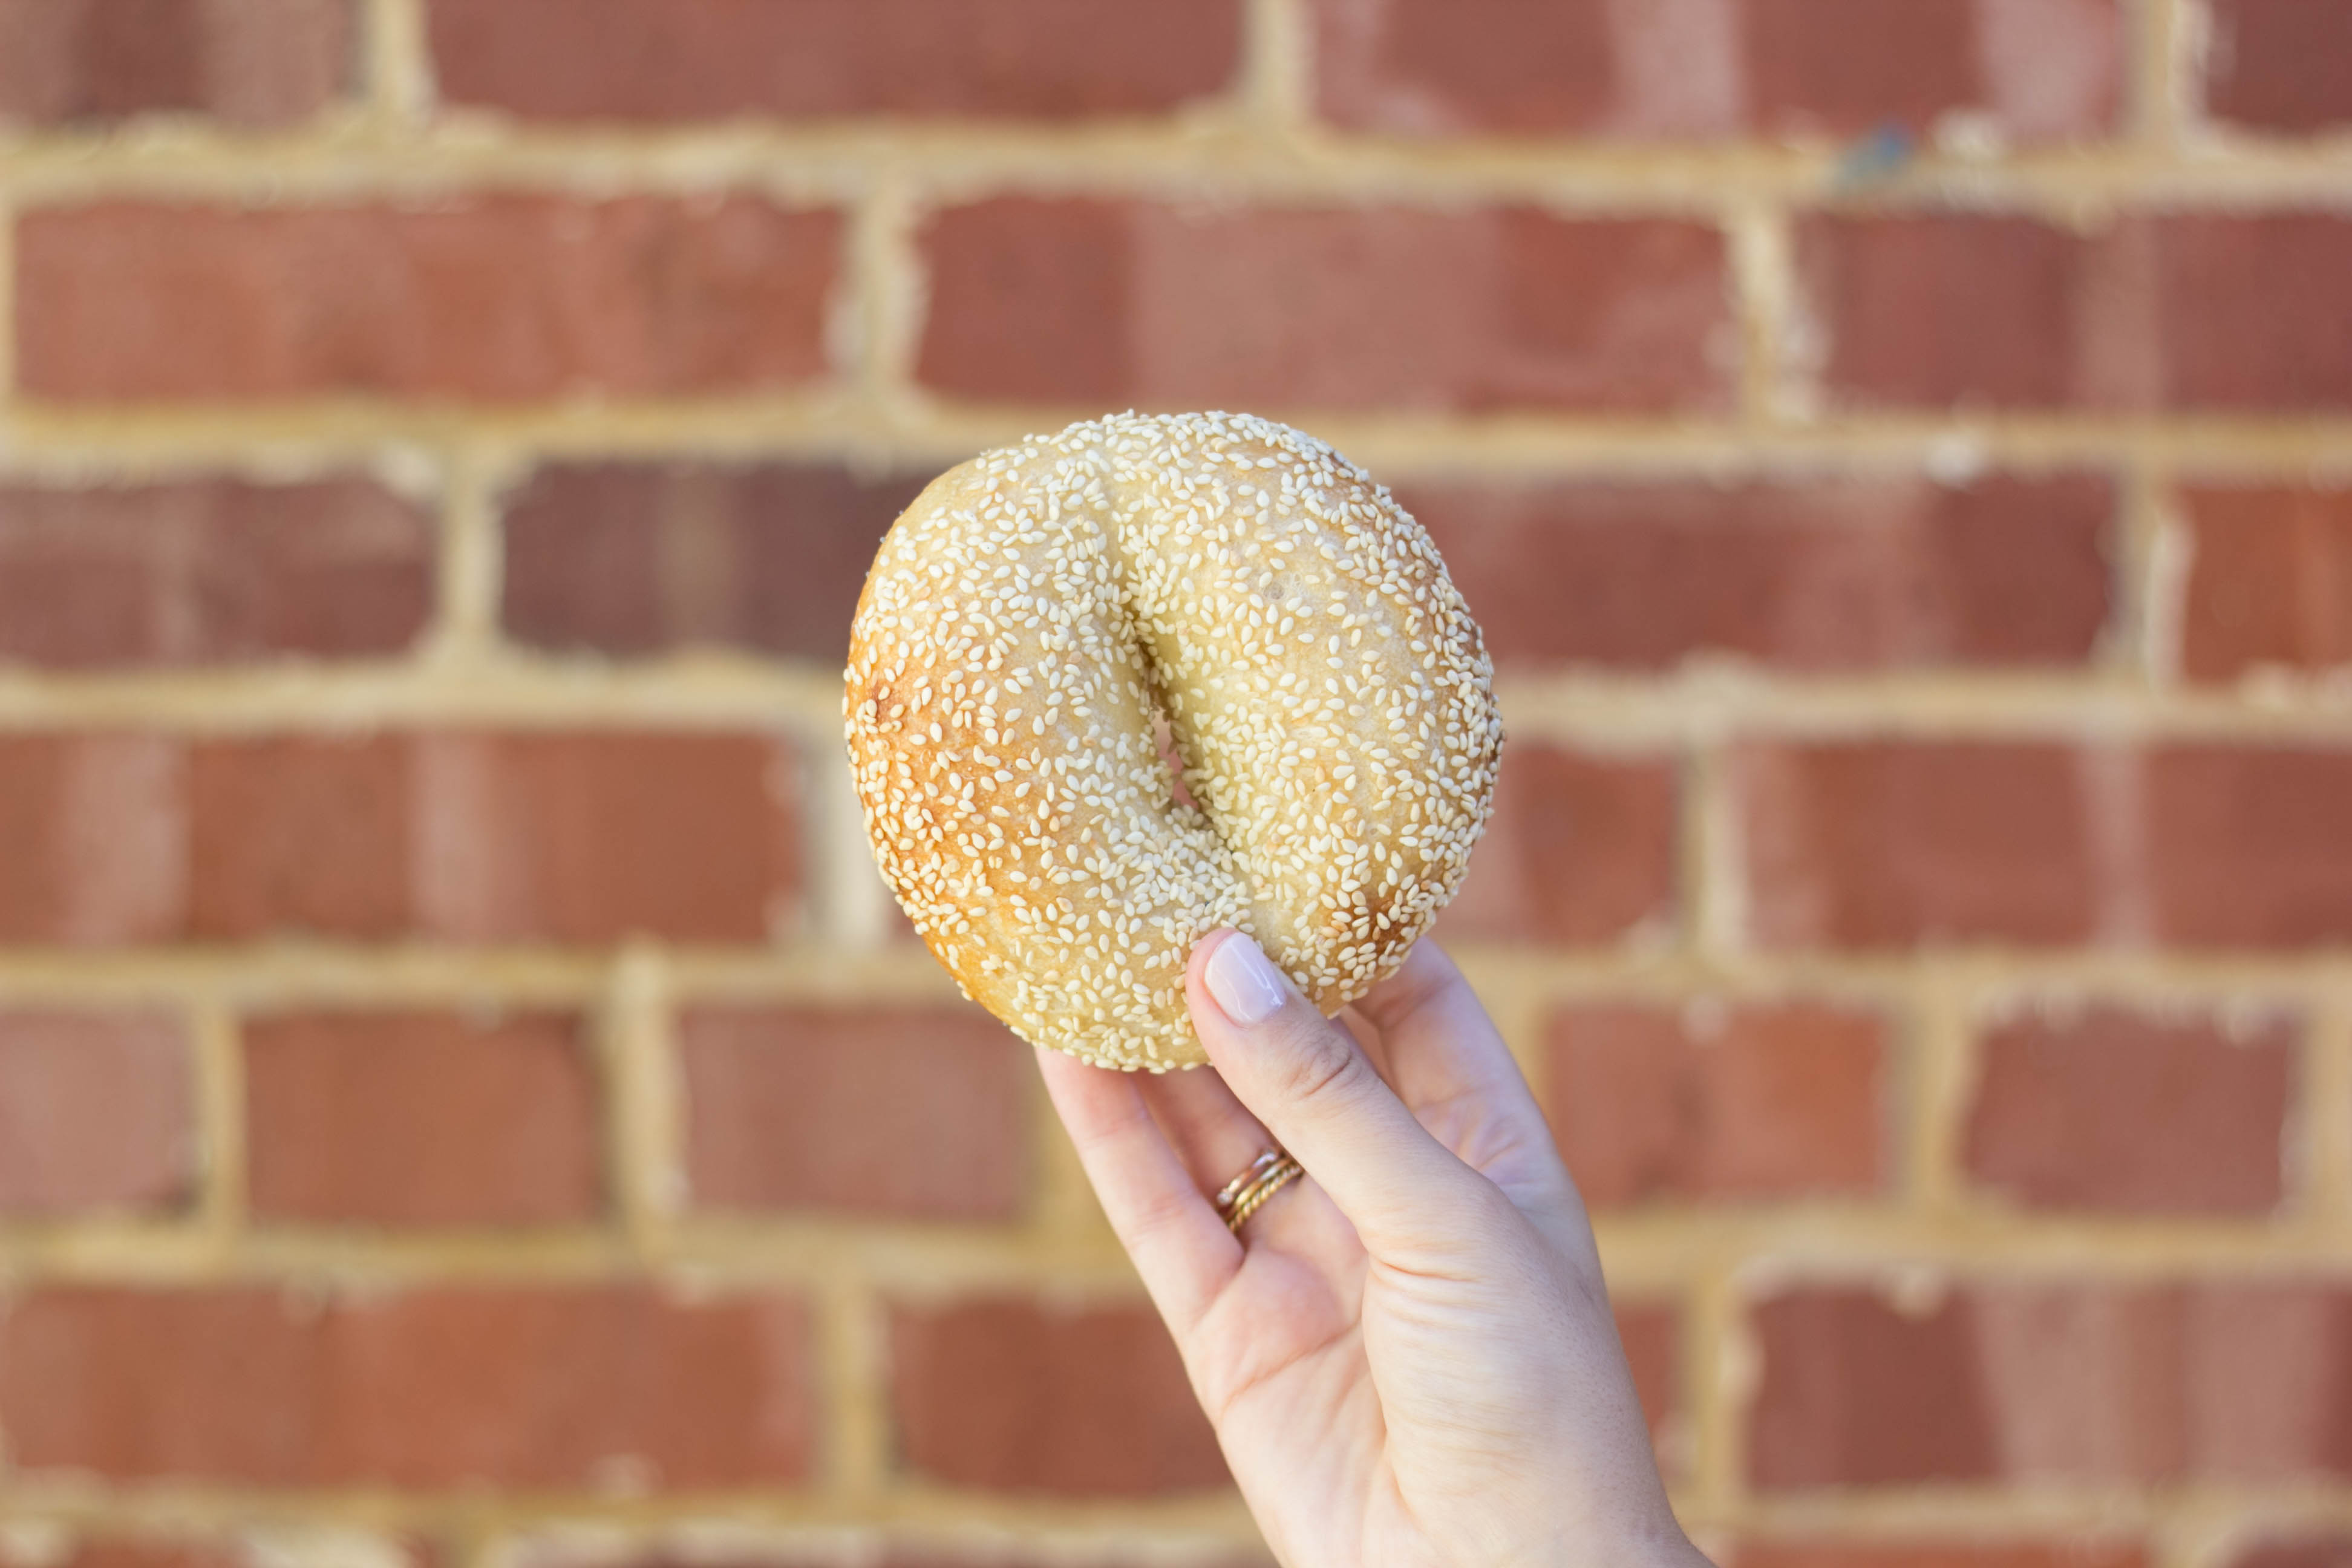 A Montreal-style bagel from Pearl’s